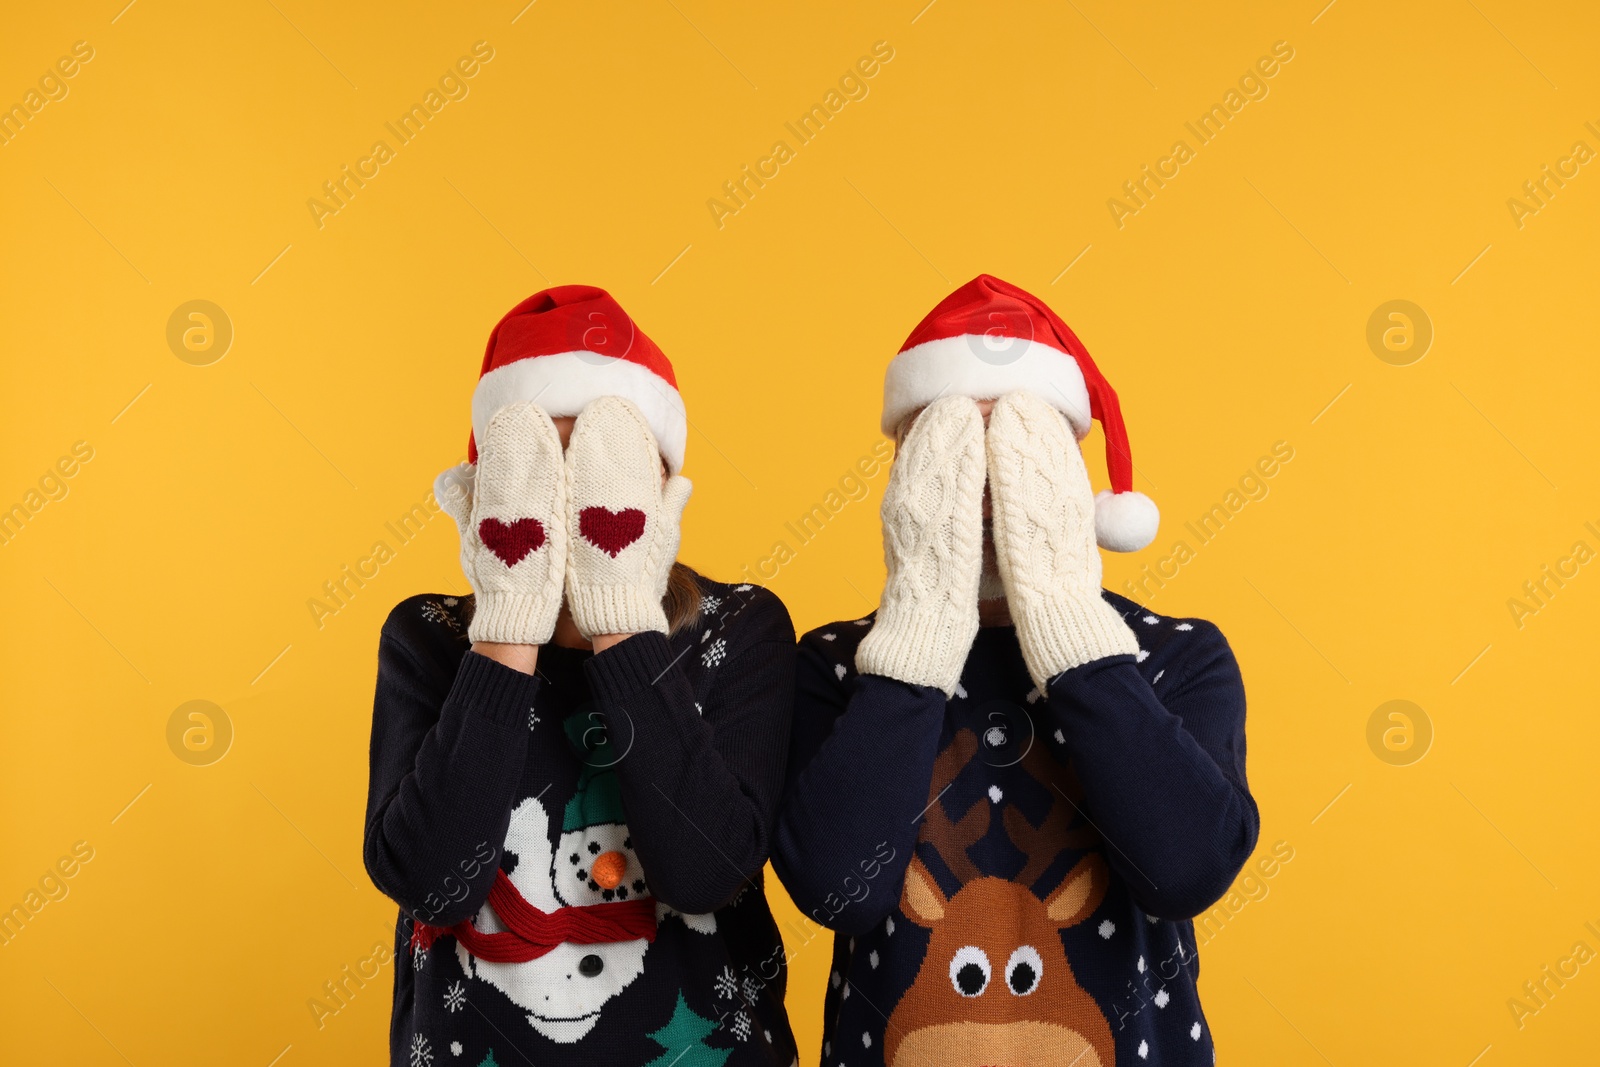 Photo of Couple in Christmas sweaters and Santa hats covering faces with hands in knitted mittens on orange background